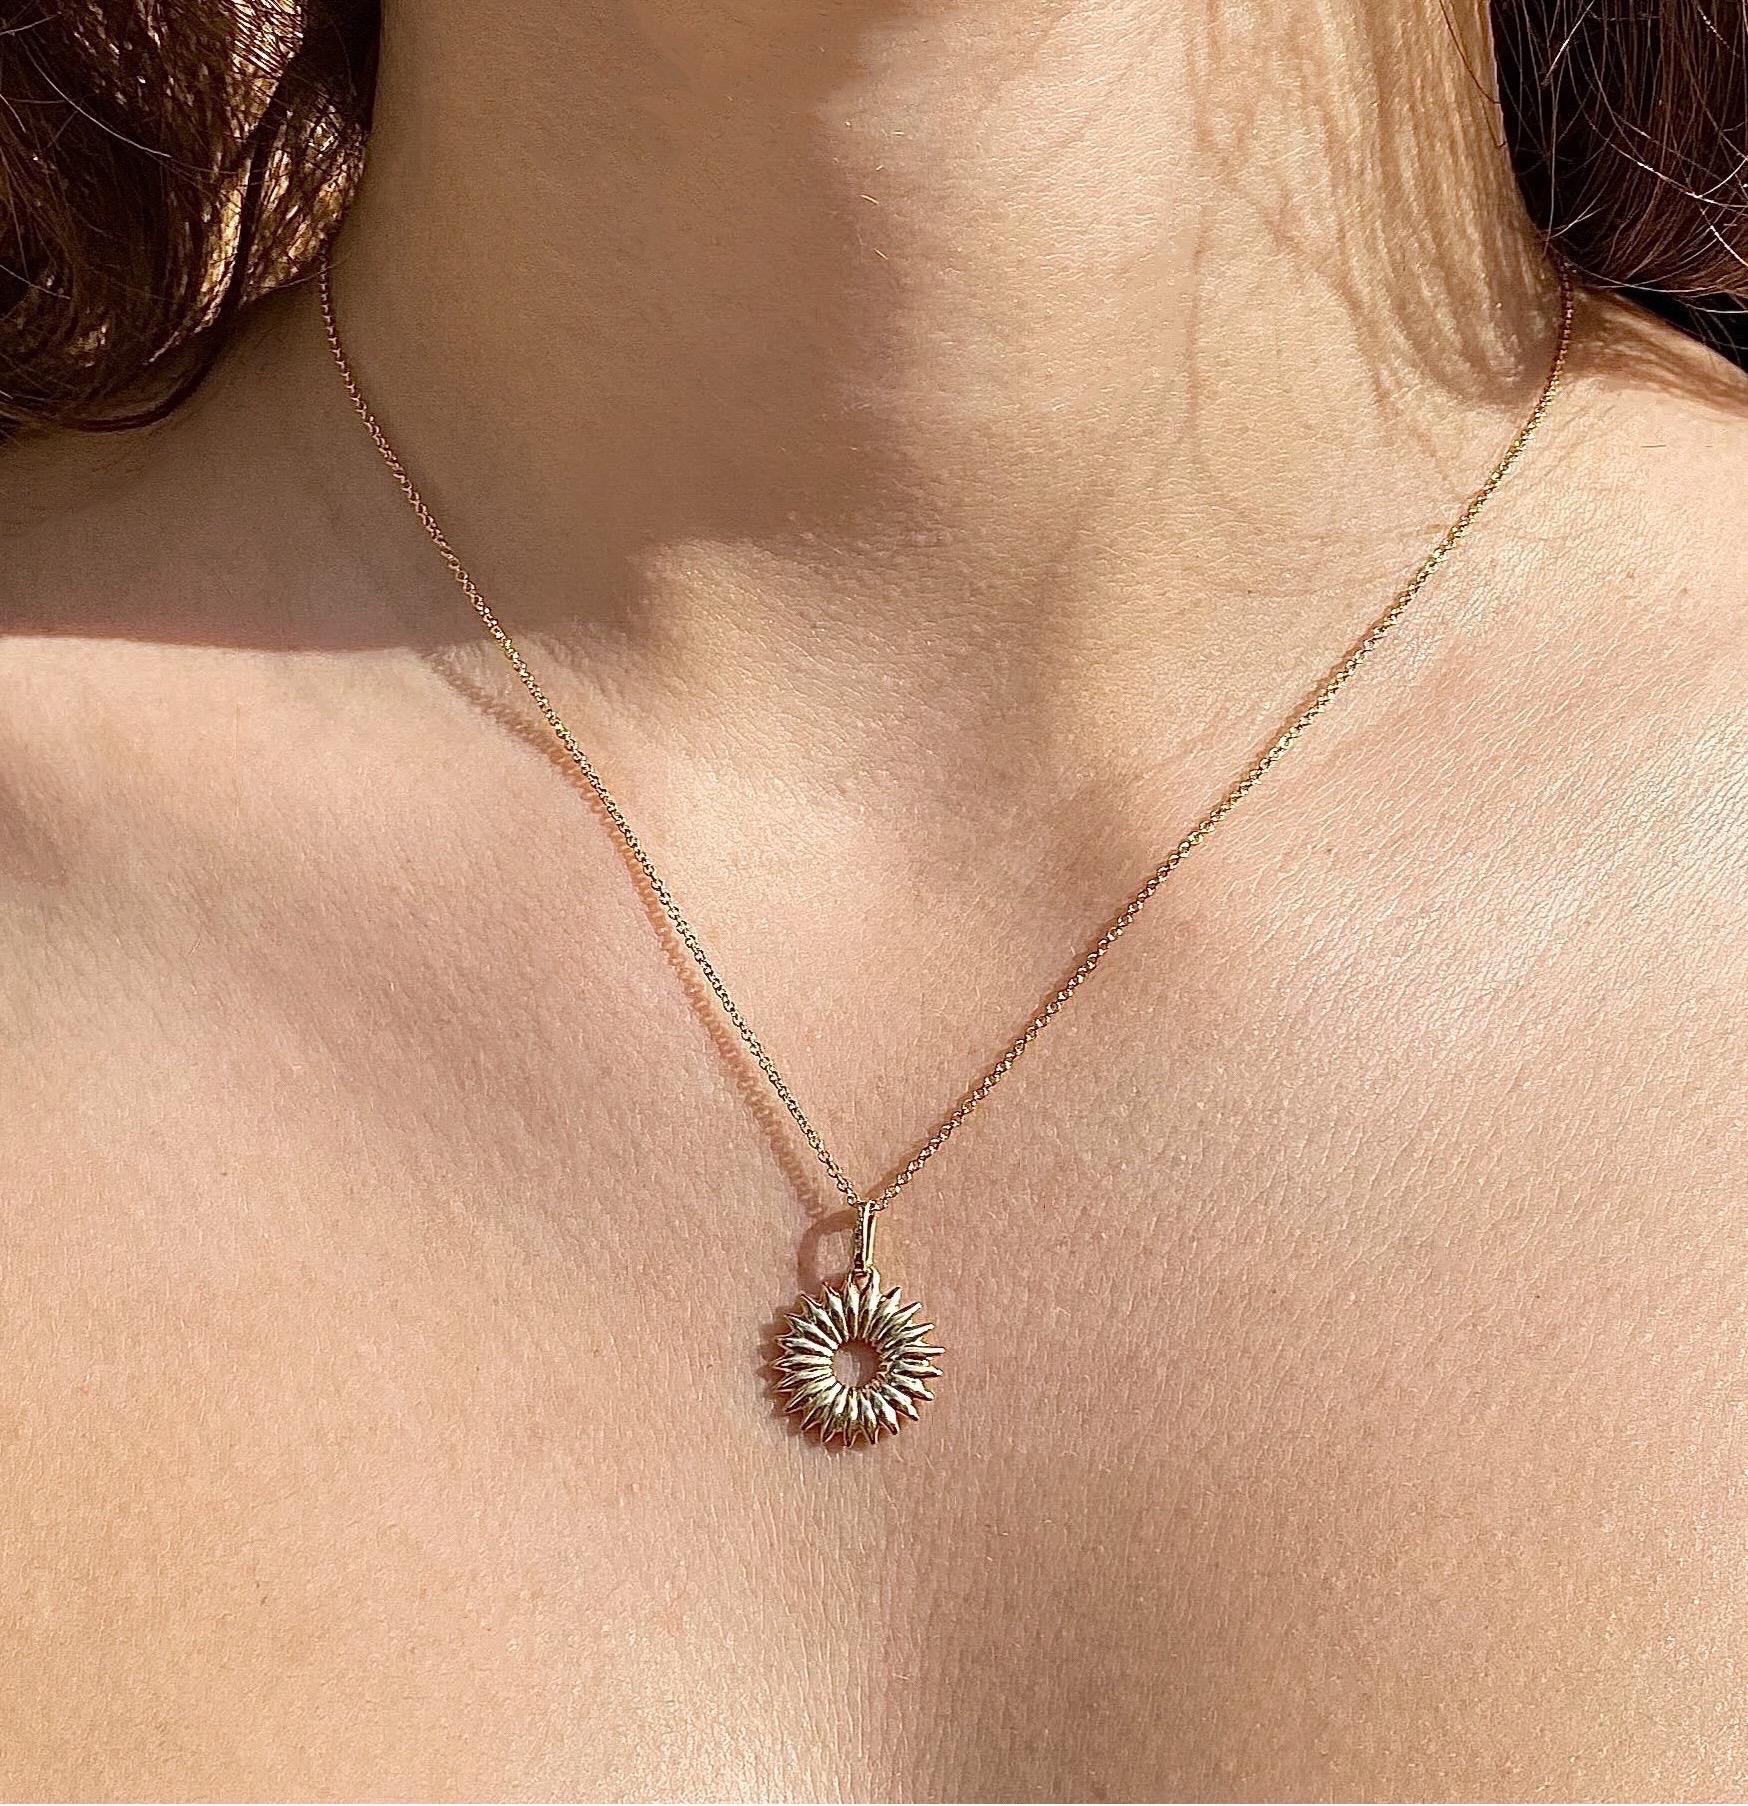 The Wreath of life, charm for 2021 is crafted in 18K gold hallmarked in Cyprus. This minimalist, statement charm necklace, comes in a highly polished finish and is attached on a standard 40 cm long, round link chain.
The Wreath of life, charm takes